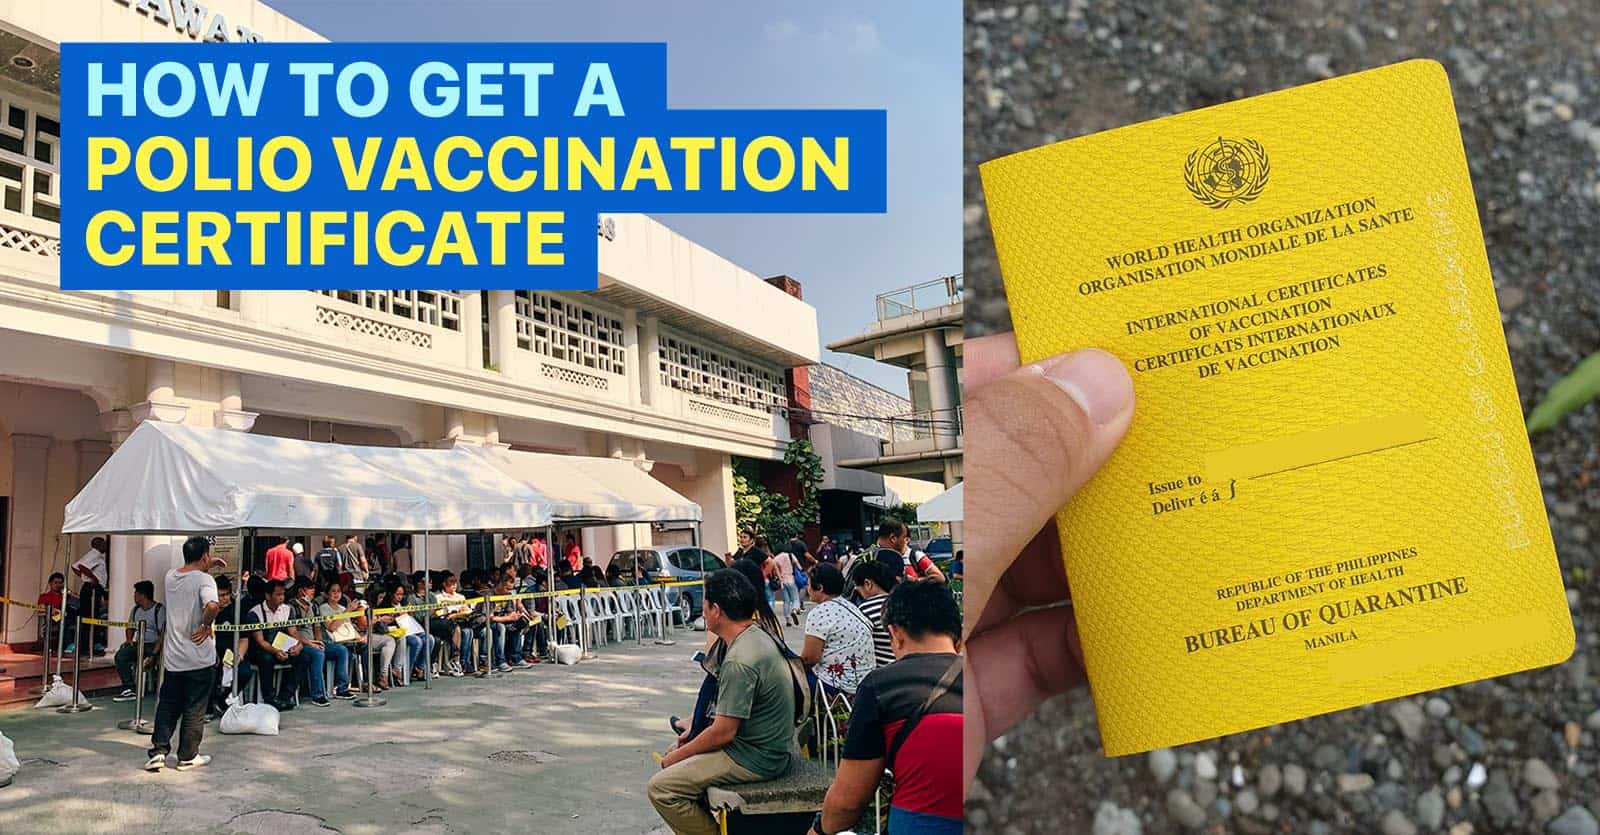 How to Get a POLIO VACCINATION CERTIFICATE from the Bureau of Quarantine